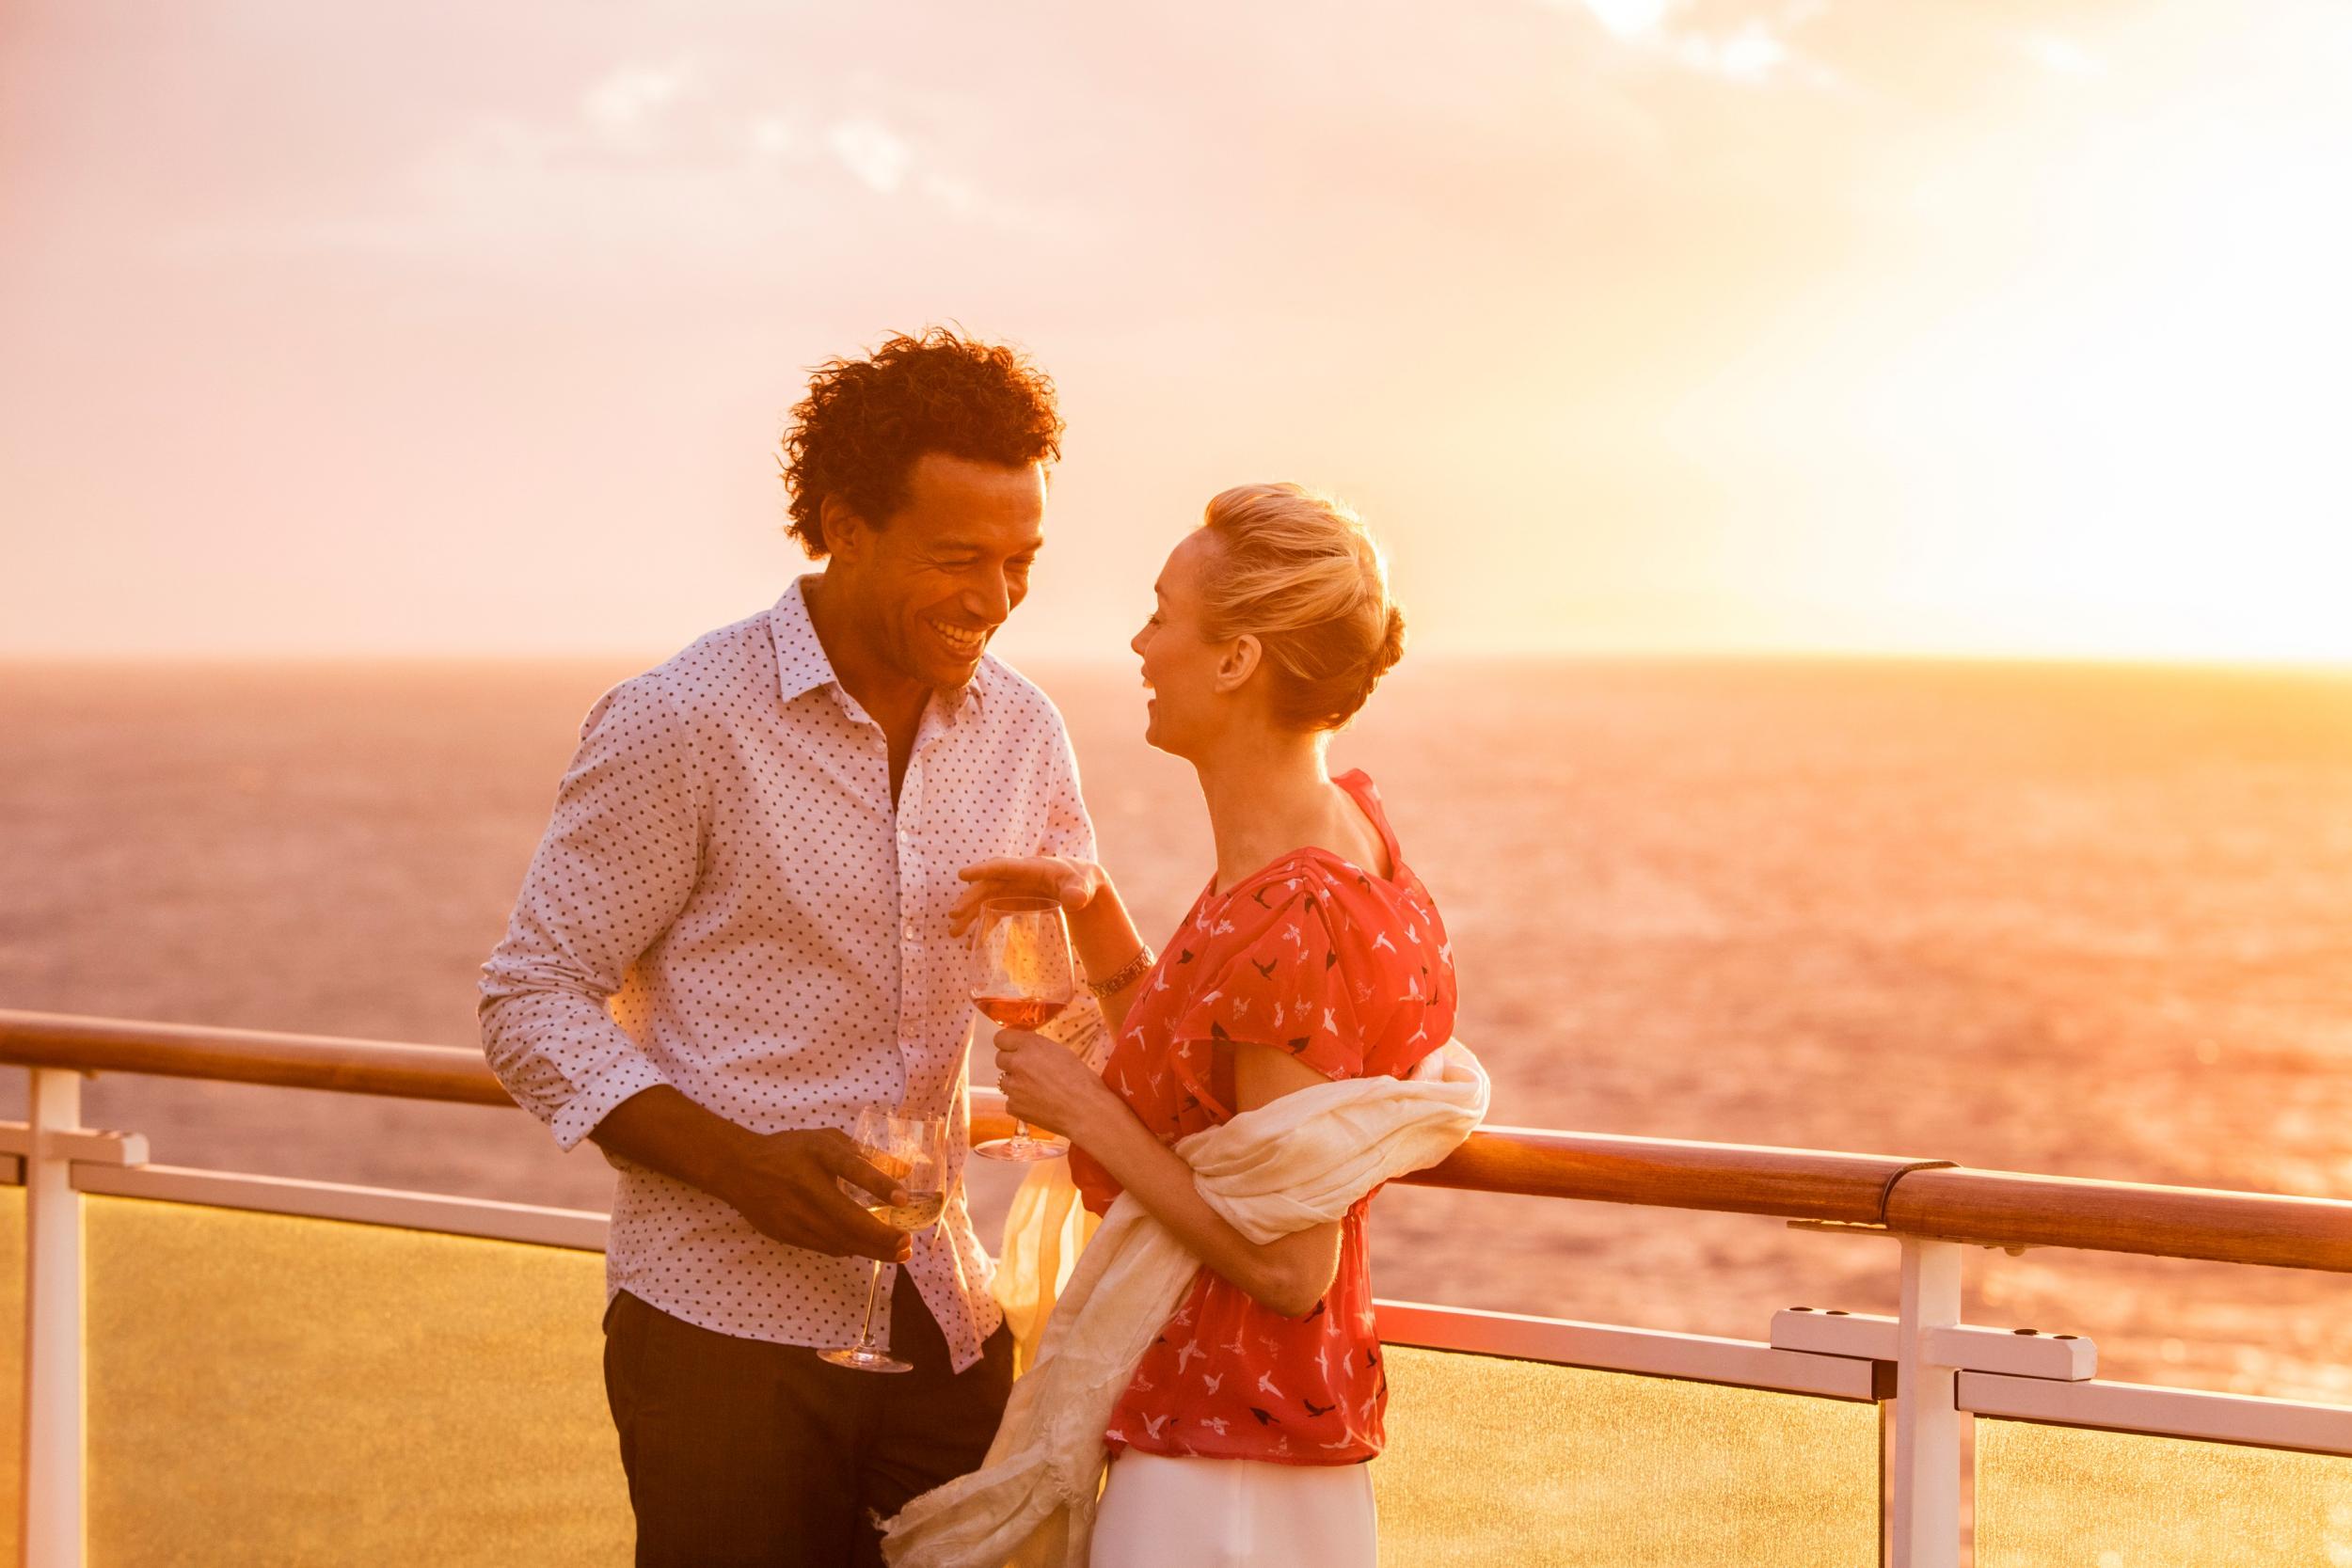 P&amp;O has perfect packages for couples (P&amp;O Cruises)